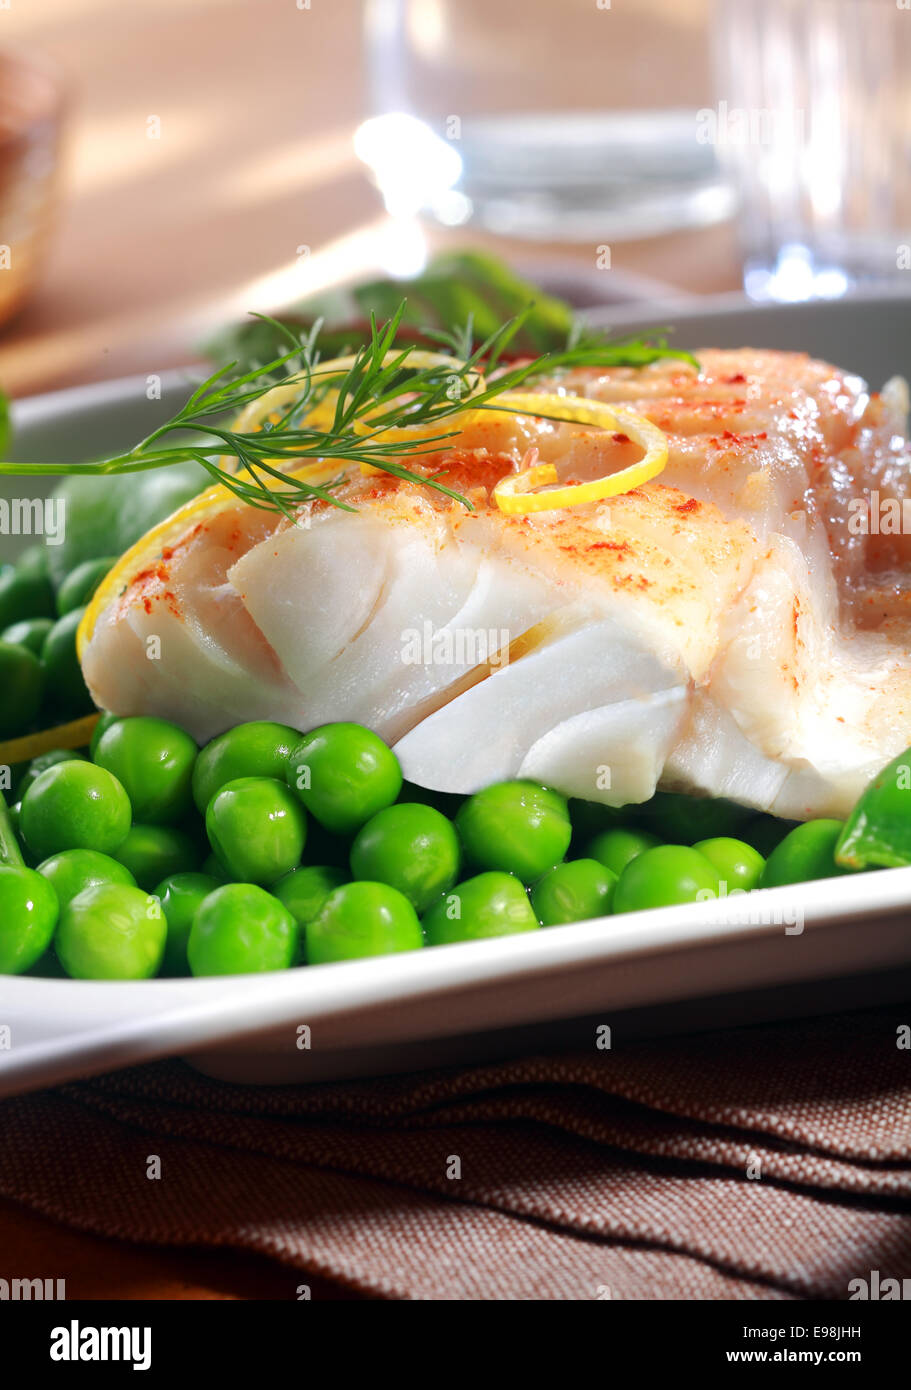 Delicious seafood meal of grilled or oven-baked fish fillet served with juicy green petit pois peas , lemon zest and dill at a restaurant Stock Photo